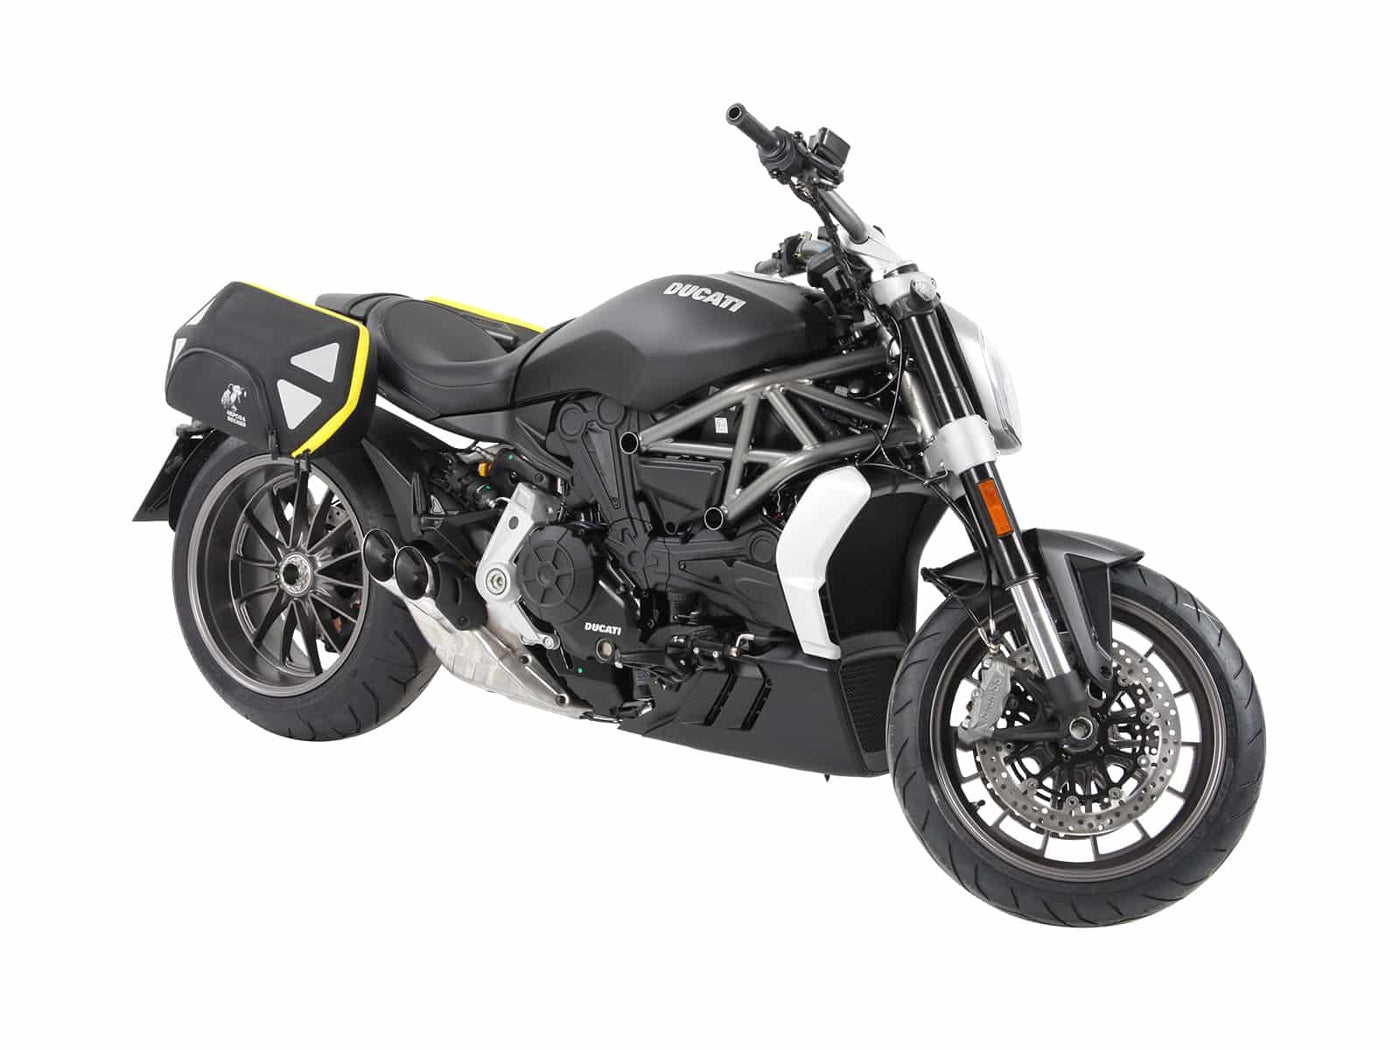 C-Bow SideCarrier for DUCATI xDiavel / S / 1260 (2016-)